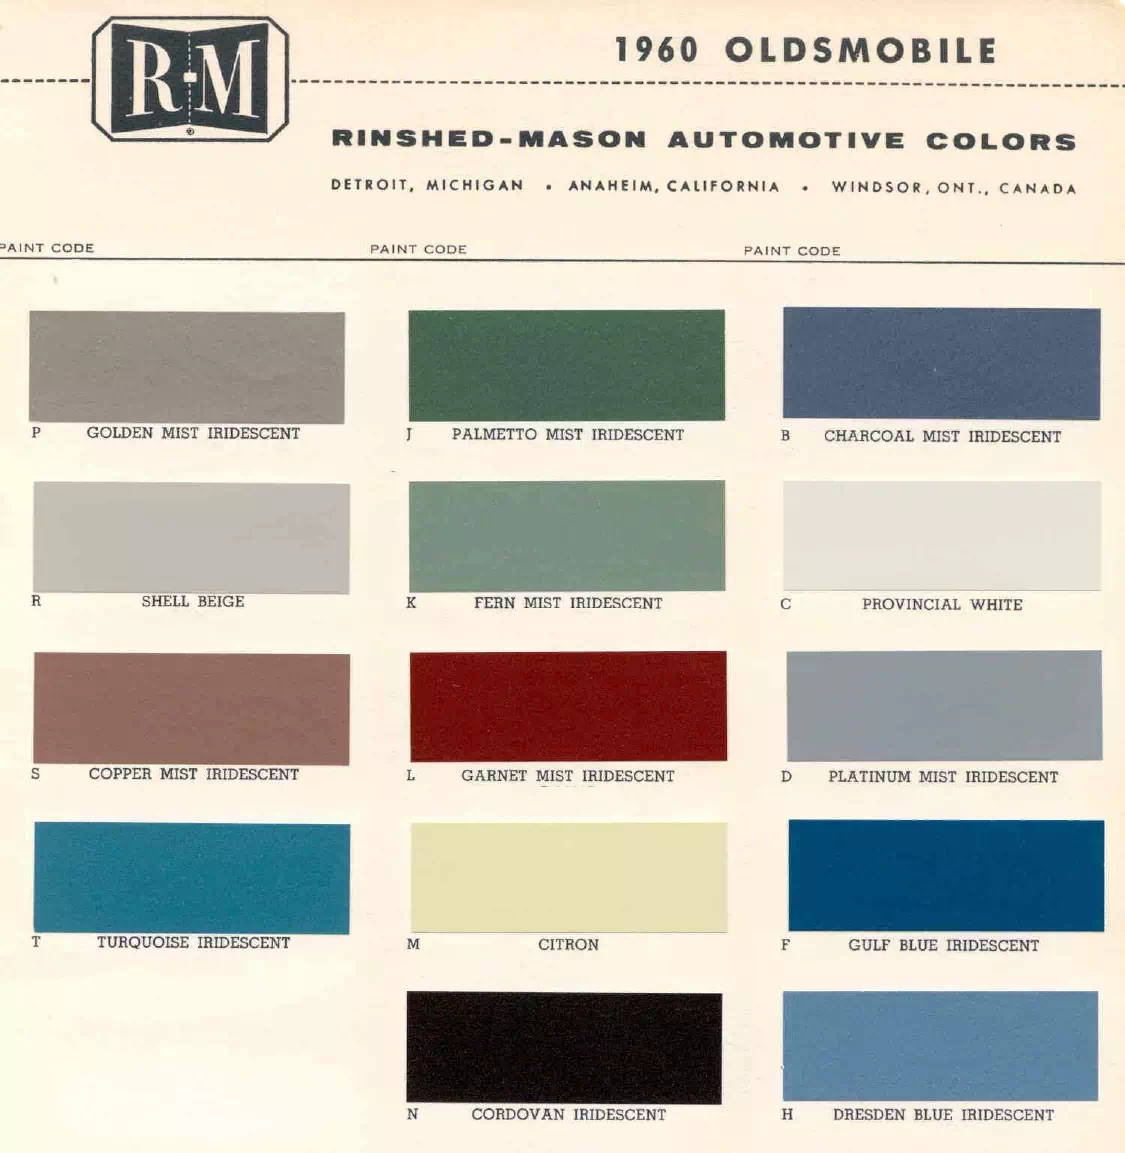 colors and color codes showing the ordering coded for  oldsmobile vehicles